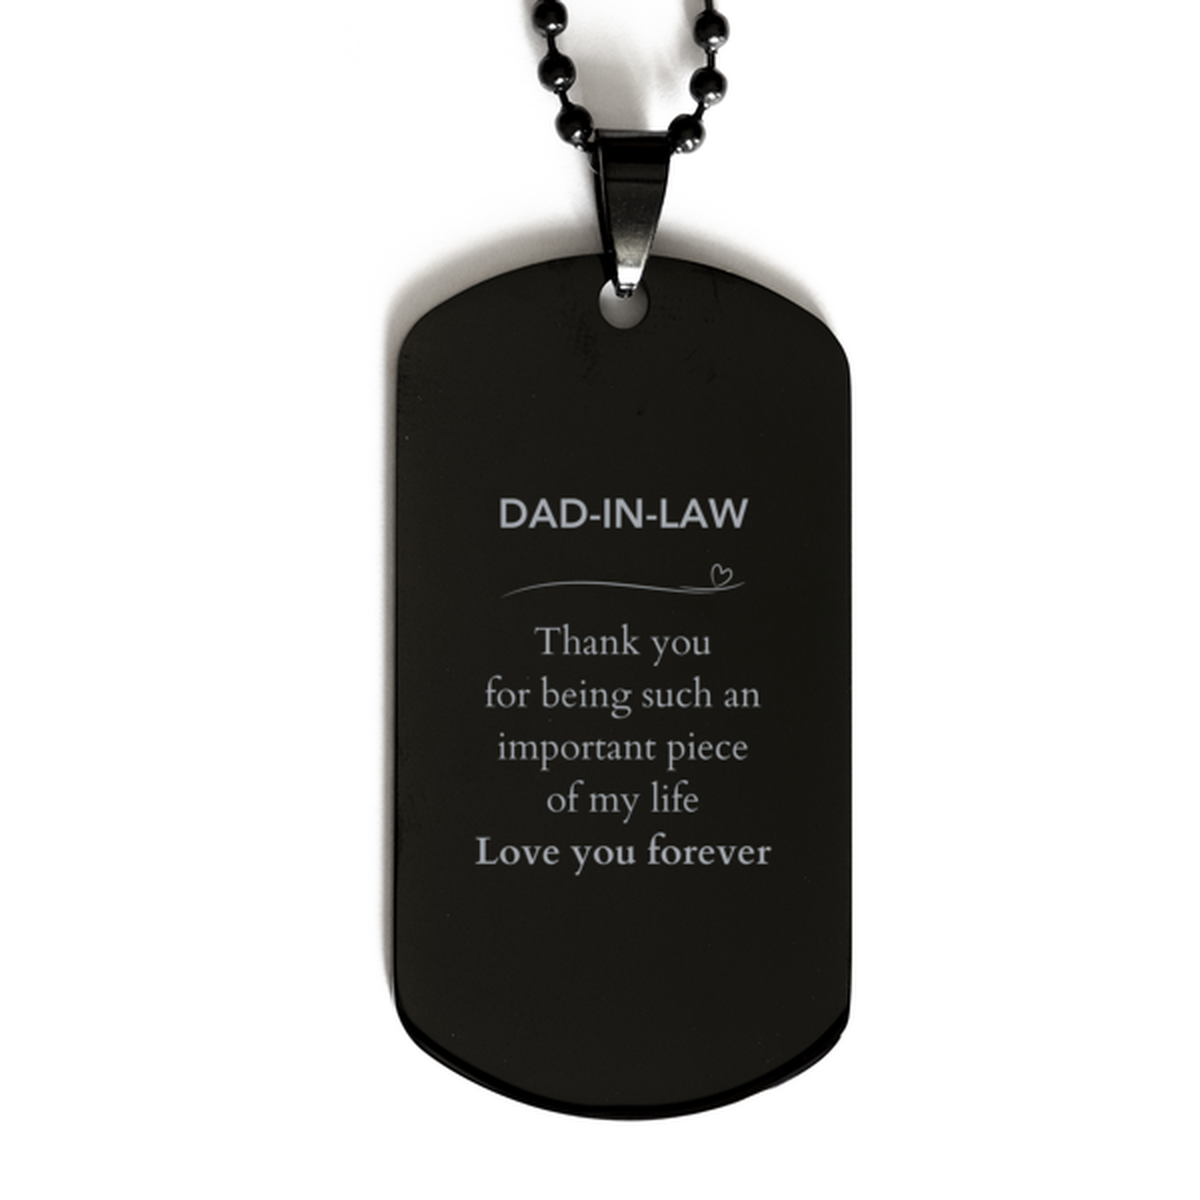 Appropriate Dad-in-law Black Dog Tag Epic Birthday Gifts for Dad-in-law Thank you for being such an important piece of my life Dad-in-law Christmas Mothers Fathers Day